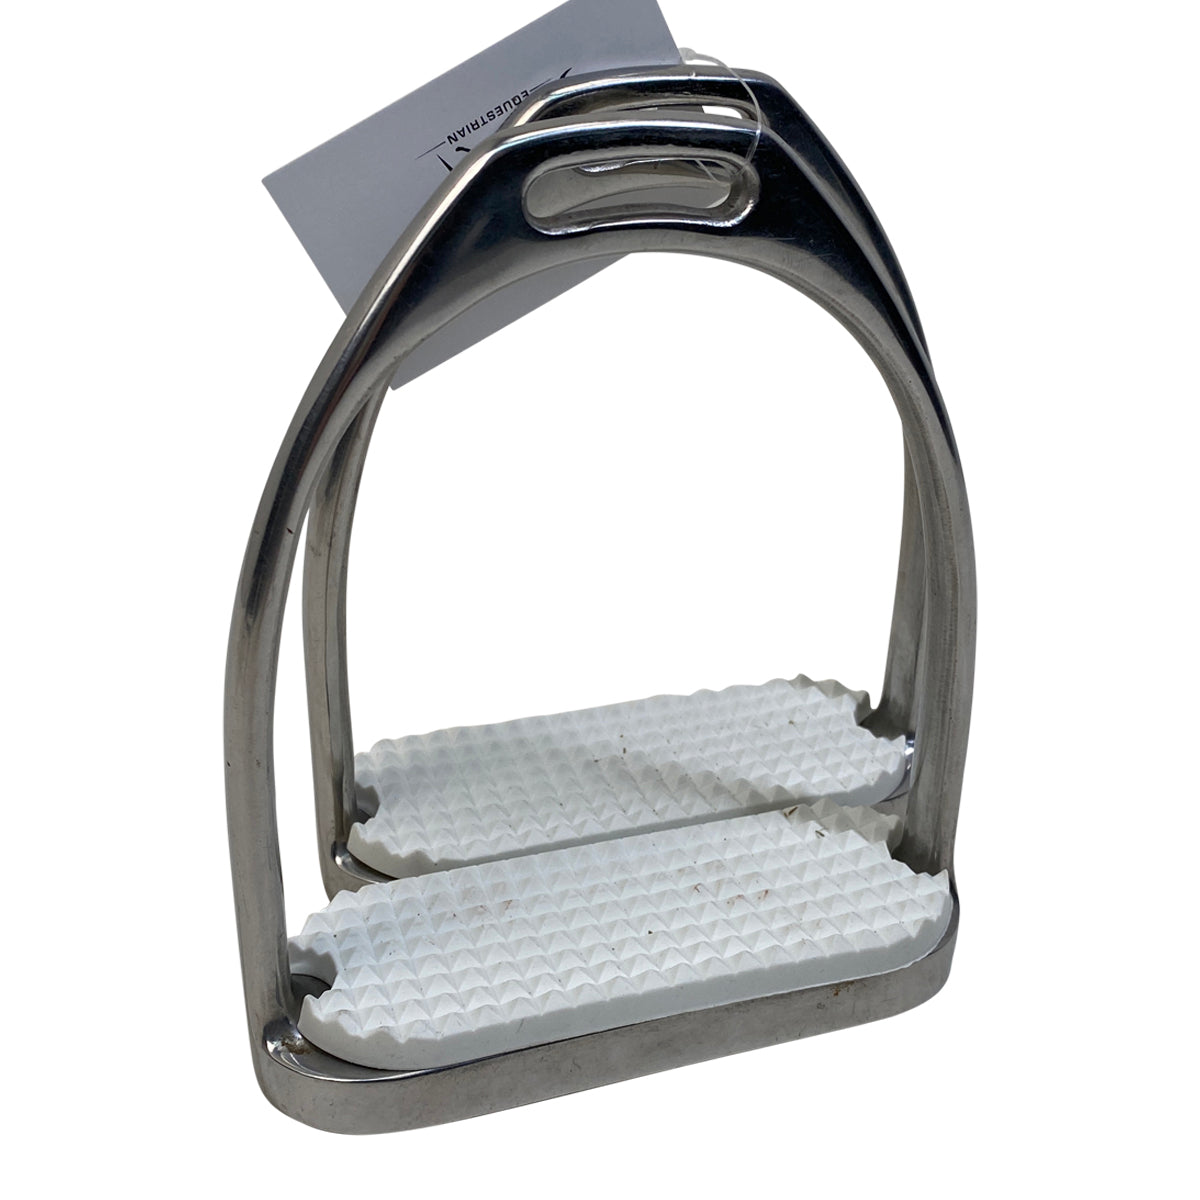 Fillis Stirrup Irons in Stainess Steel